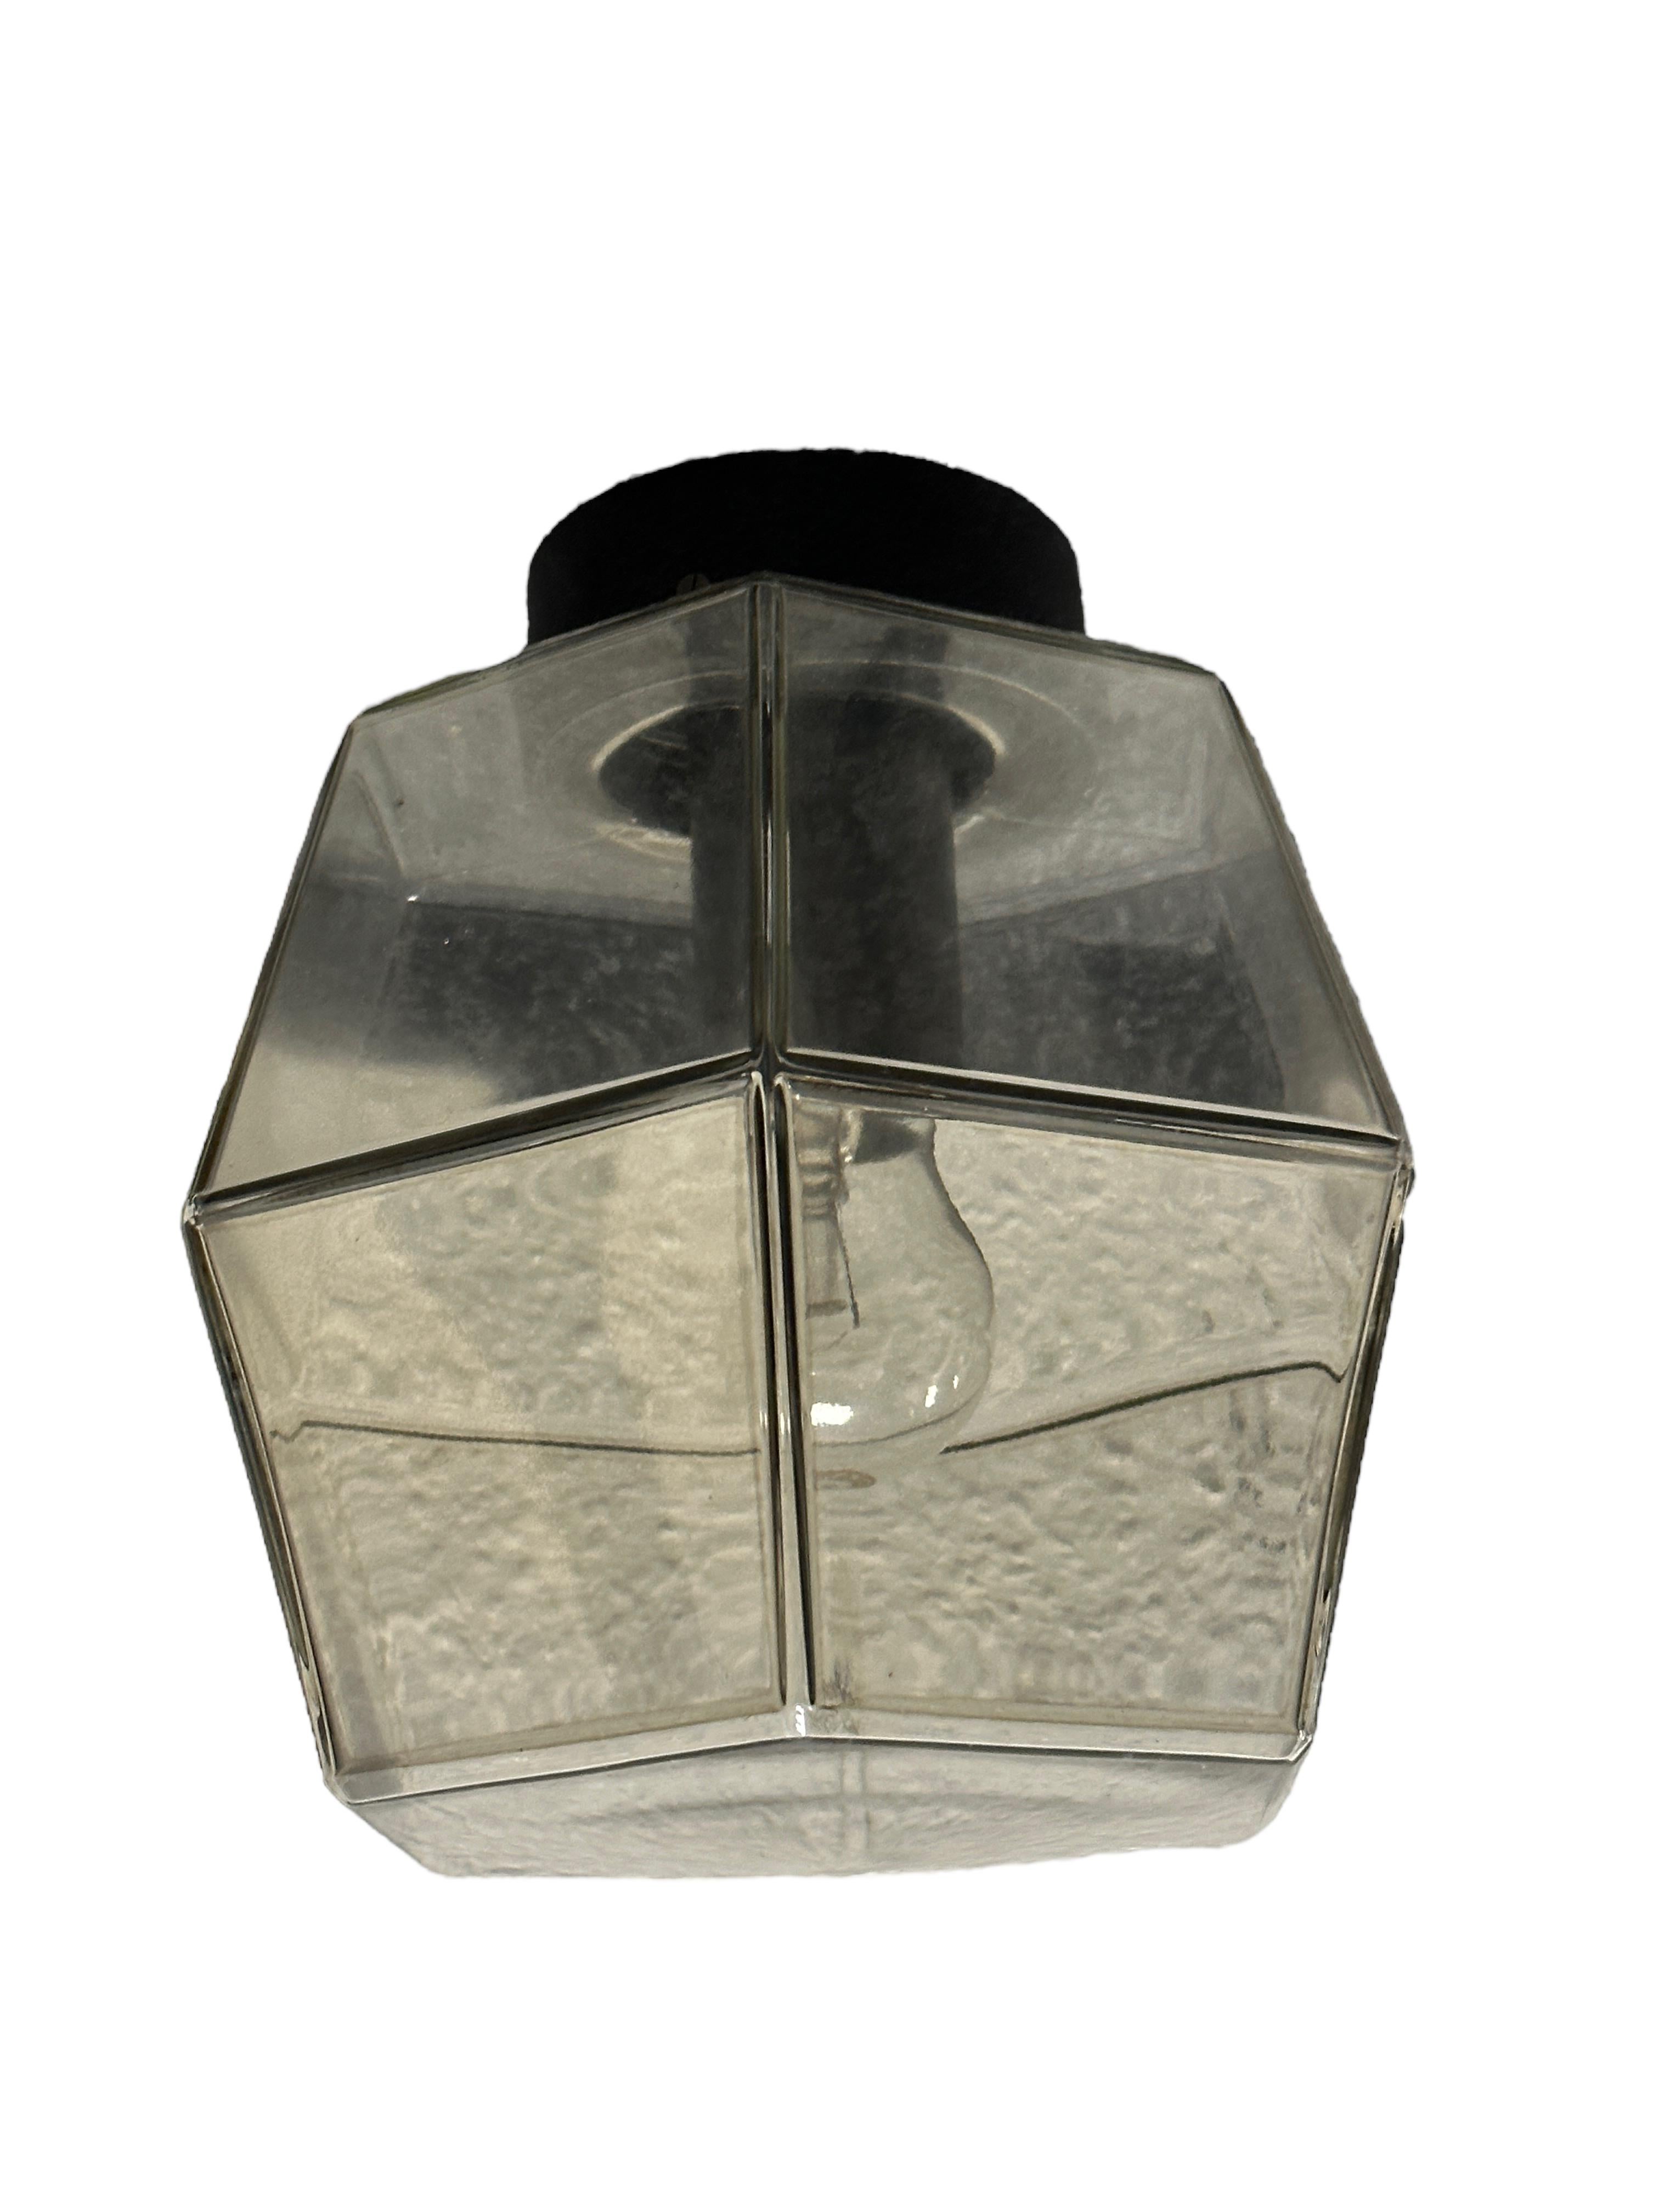 Hexagonal Smoked Glass Flush Mount by RZB Leuchten Germany, 1970s For Sale 1